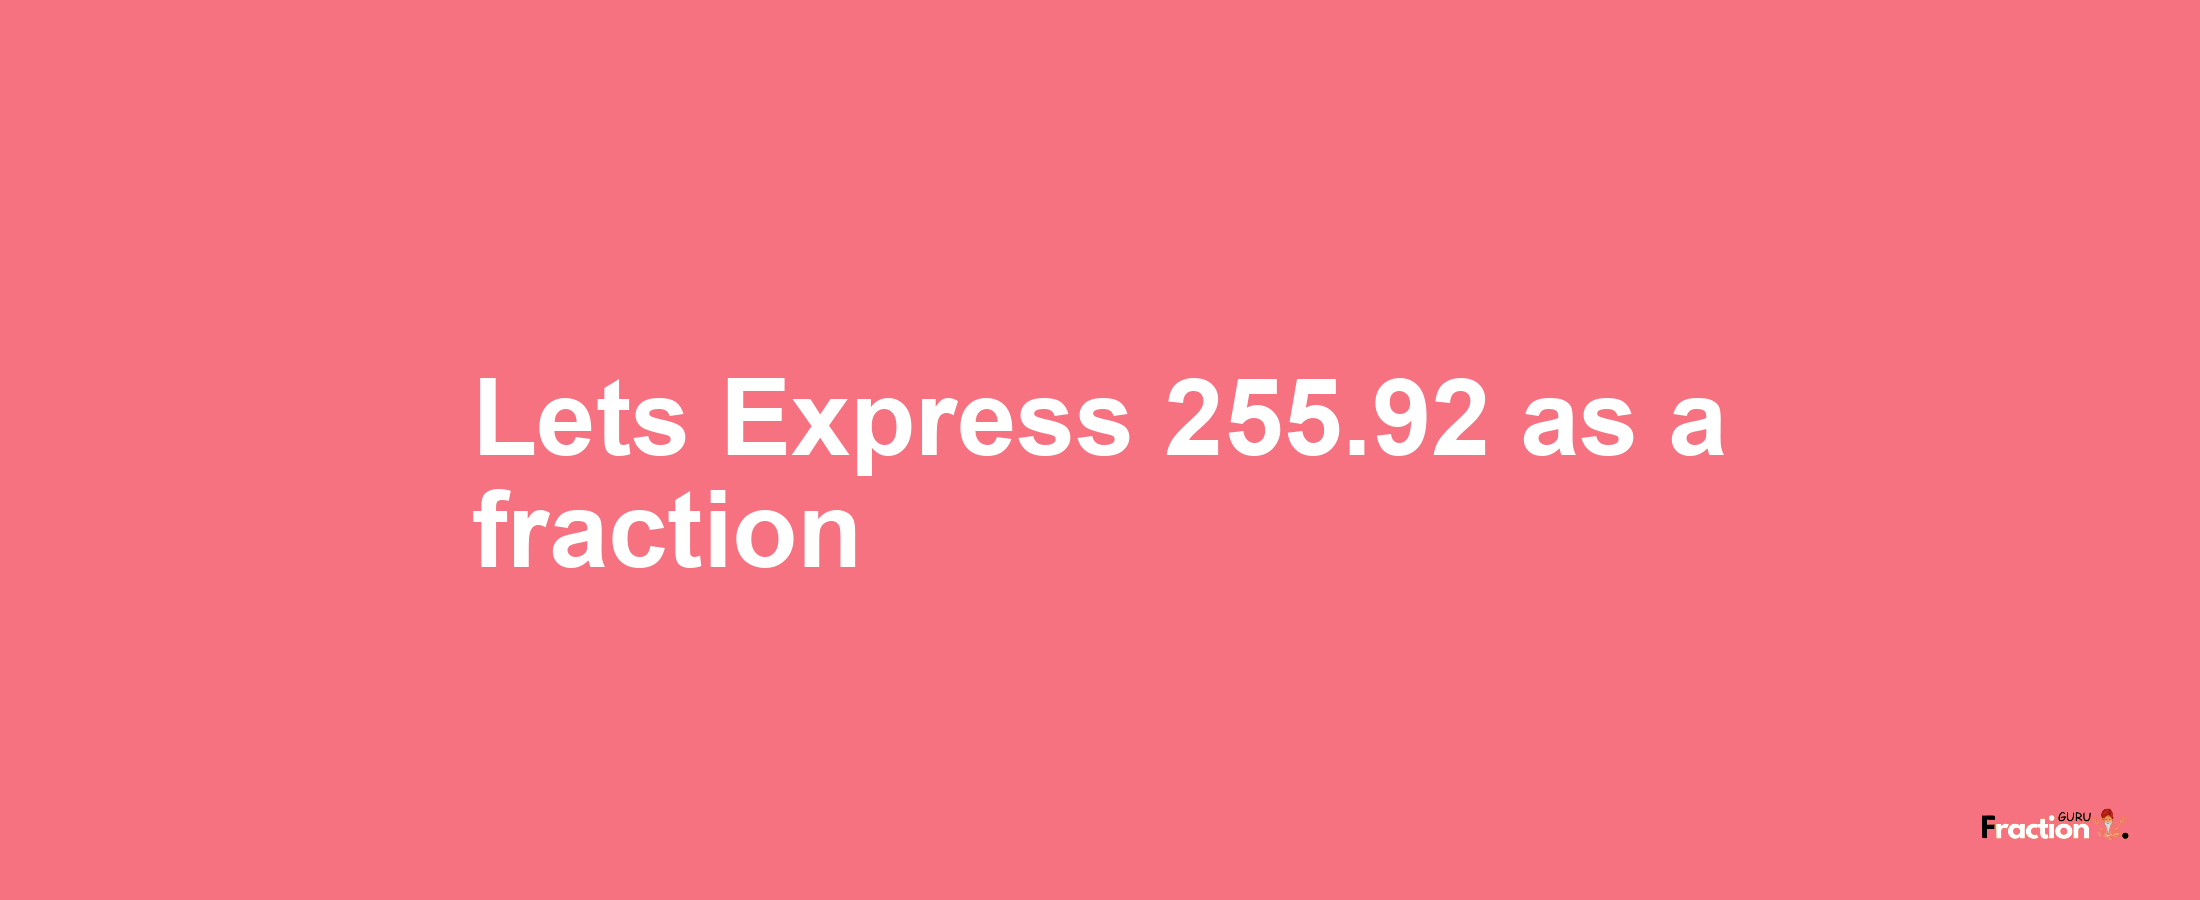 Lets Express 255.92 as afraction